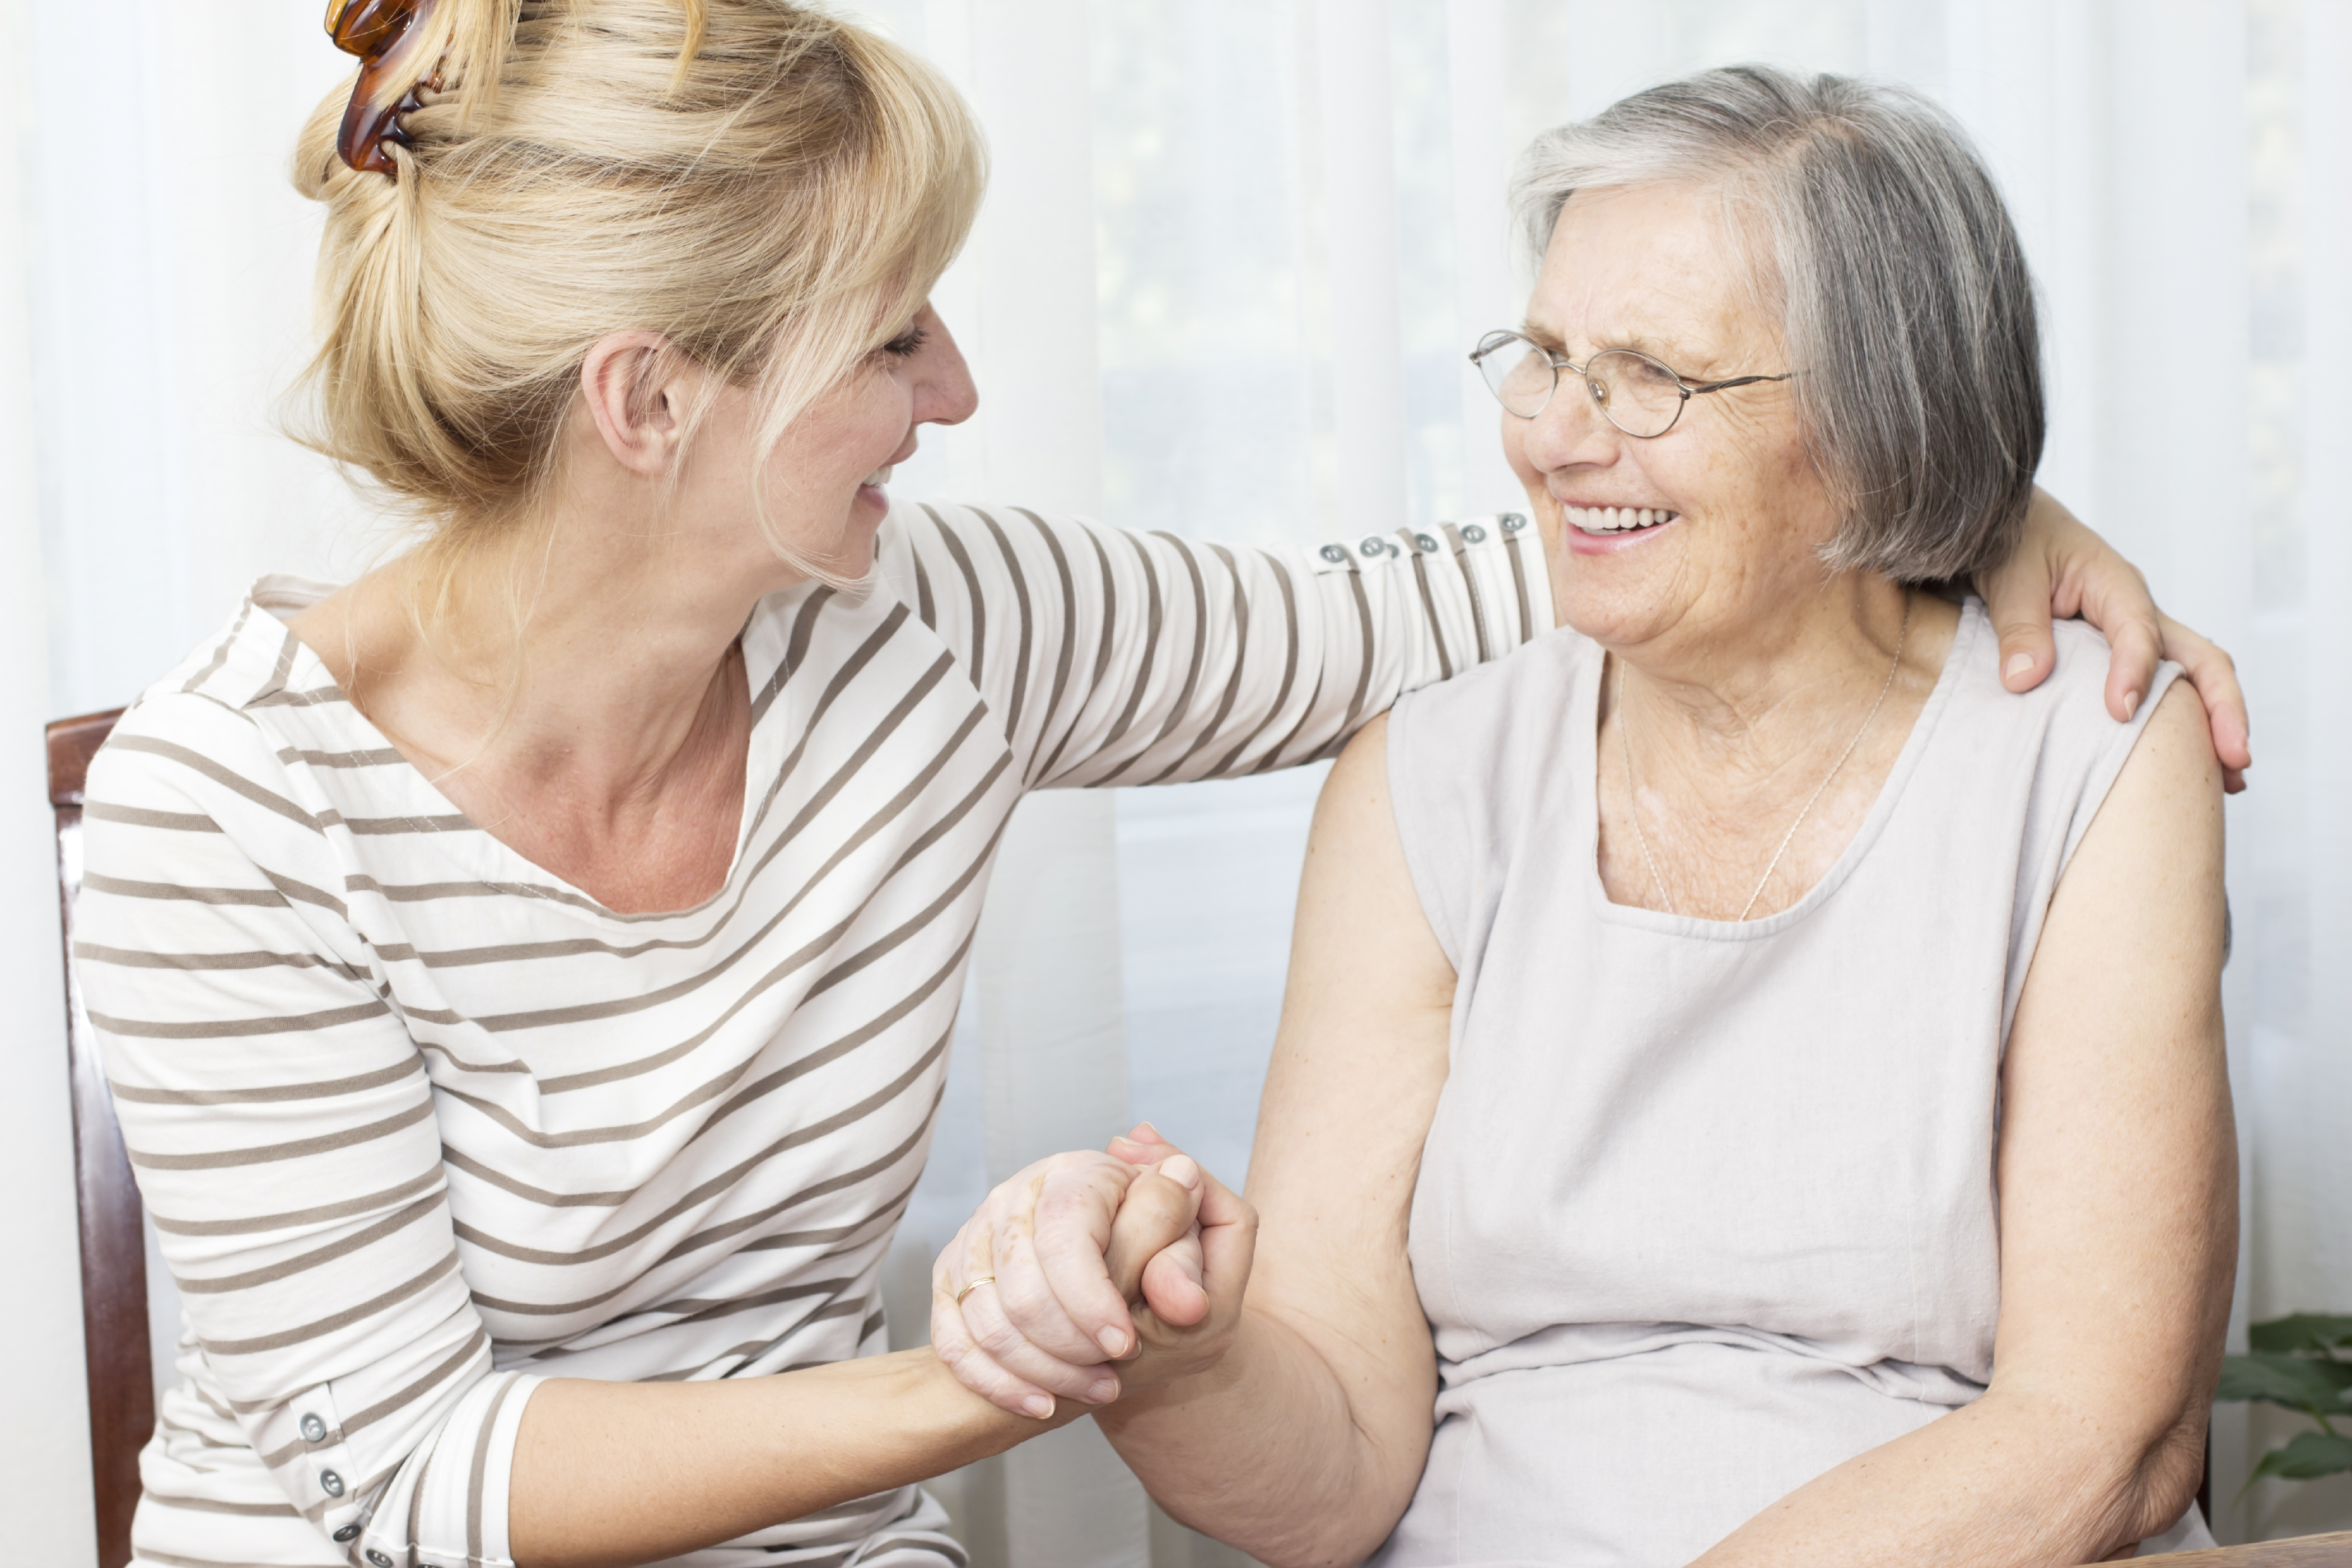 5 Ways to Maintain Your Health and Happiness as a Caregiver